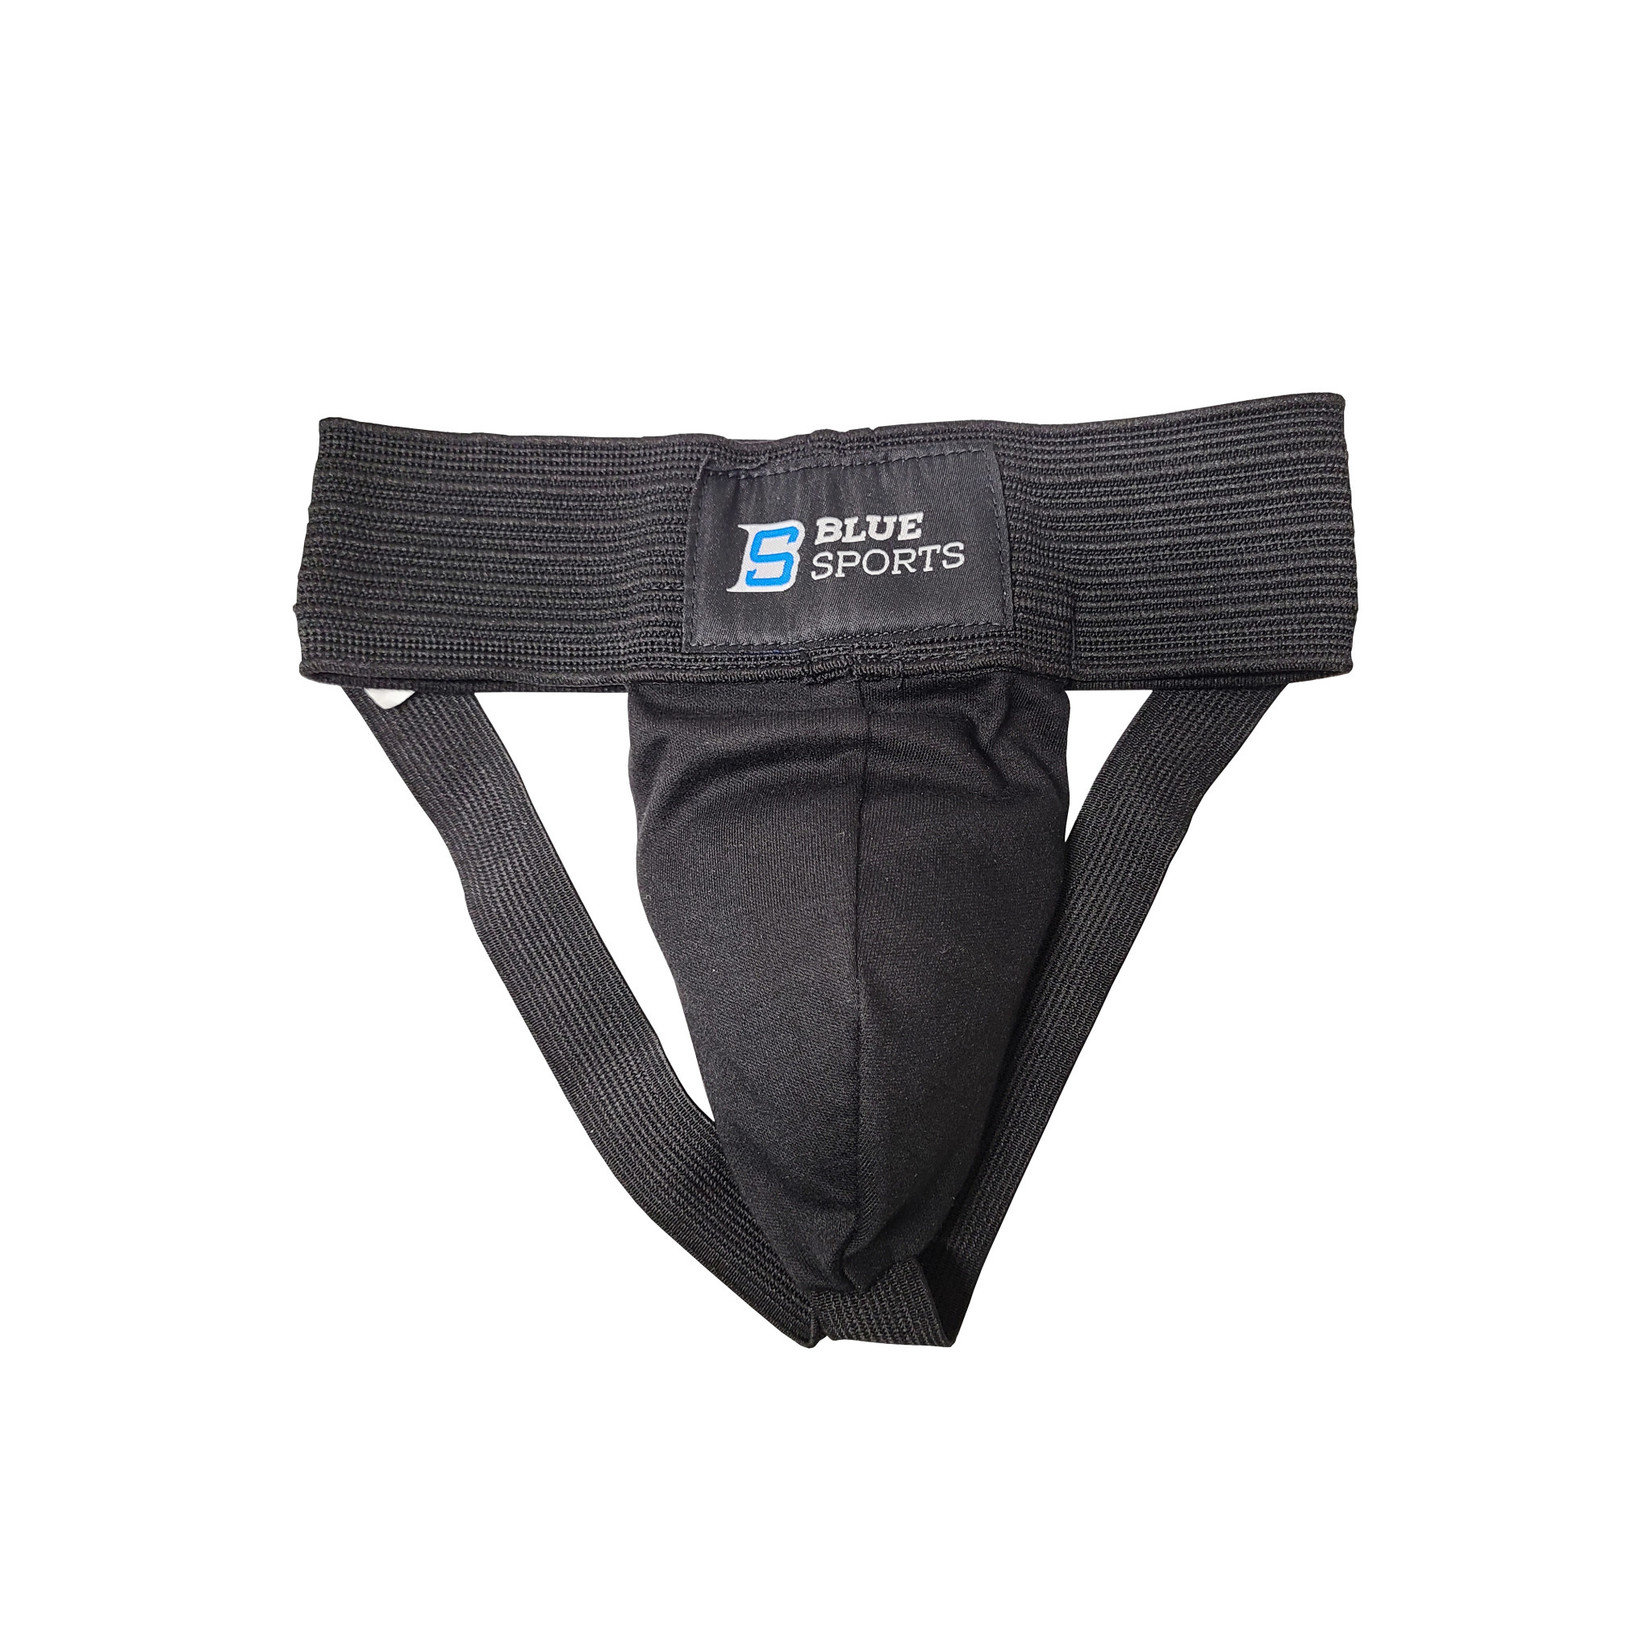 Blue Sports Jock Strap with Cup Junior